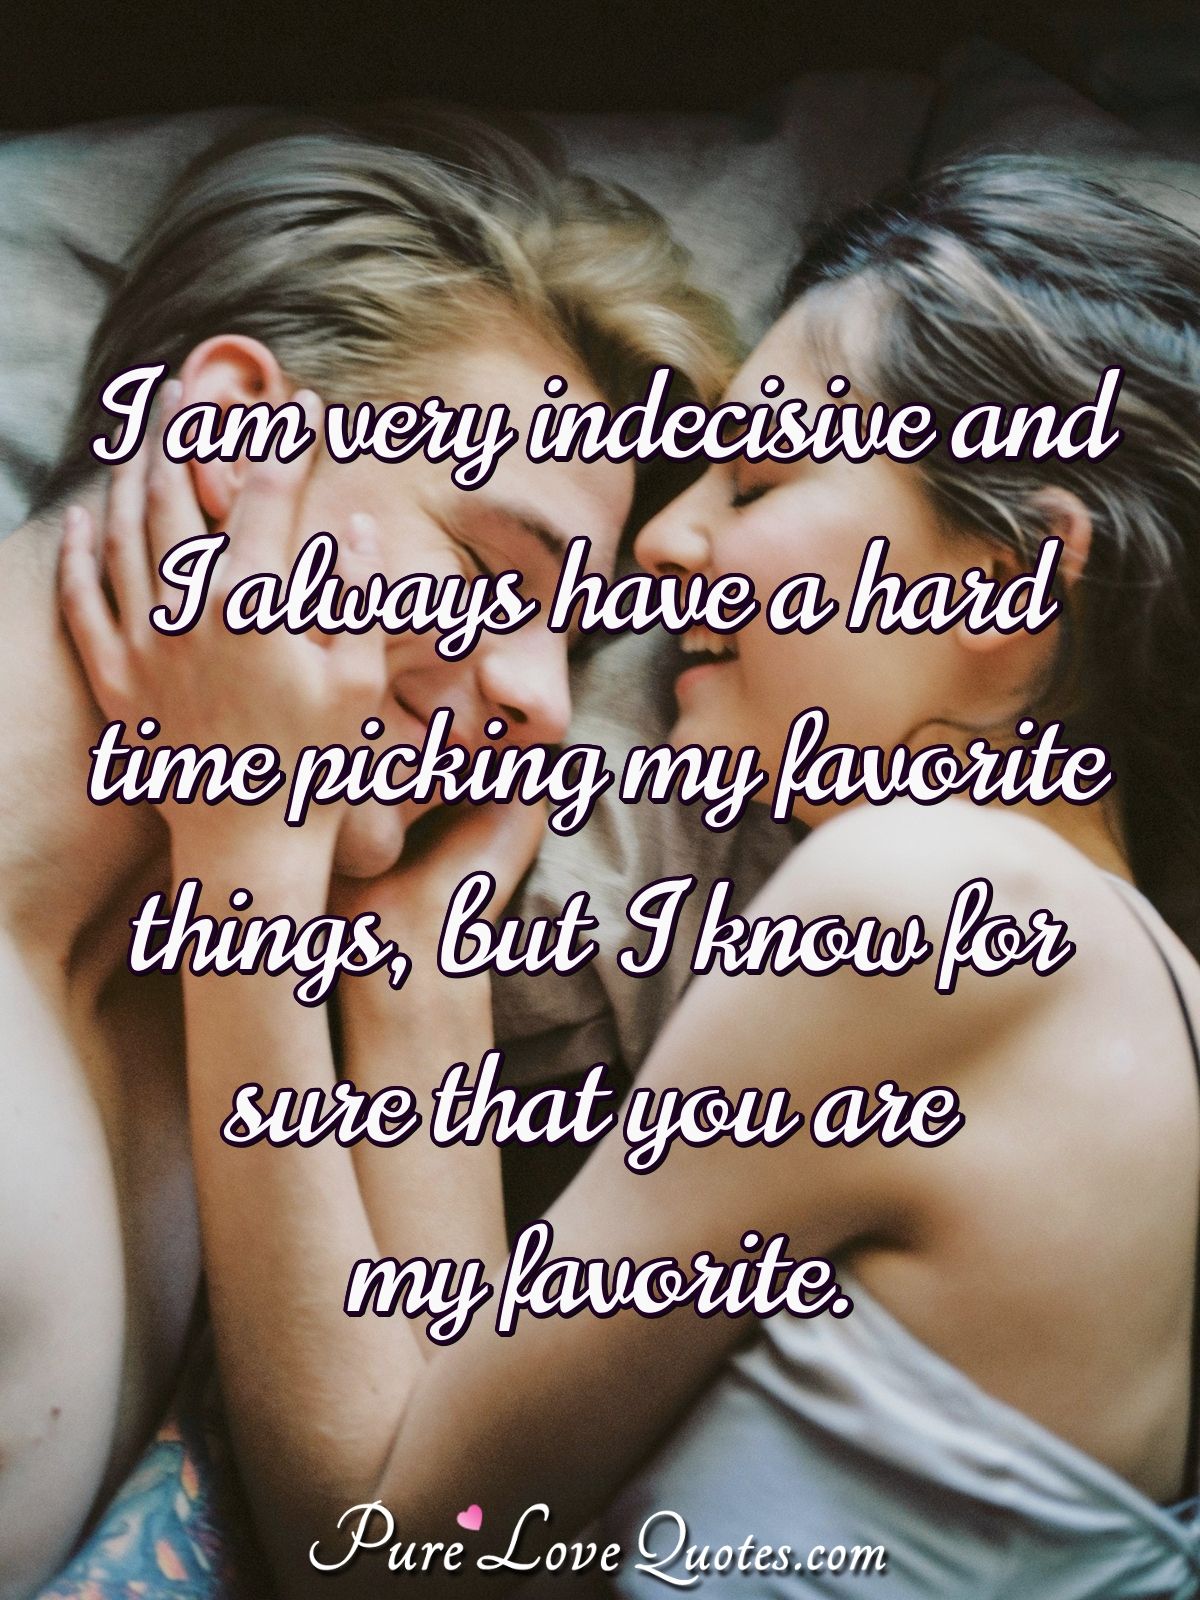 I am very indecisive and I always have a hard time picking my favorite things, but I know for sure that you are my favorite. - Anonymous